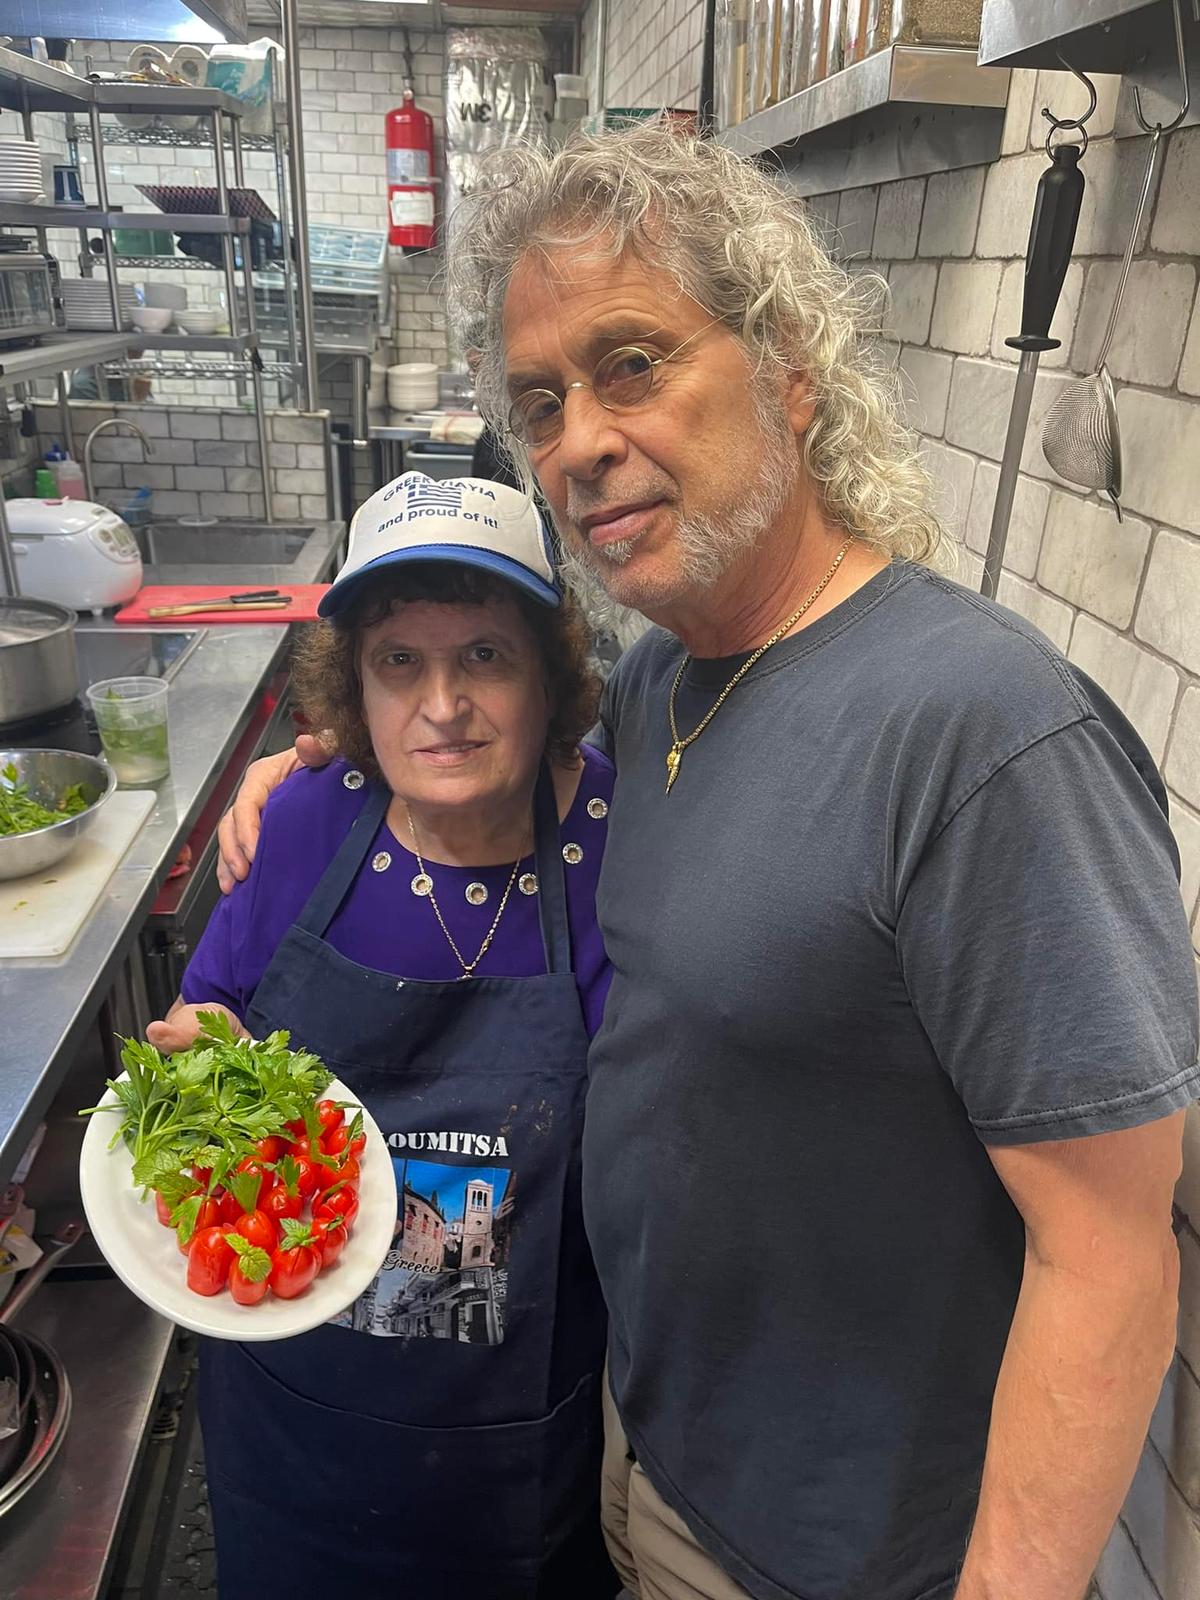 Nonna Ploumitsa from Chios, Greece with owner Jody. (Courtesy of <a href="https://www.enotecamaria.com/">Jody Scaravella</a>)